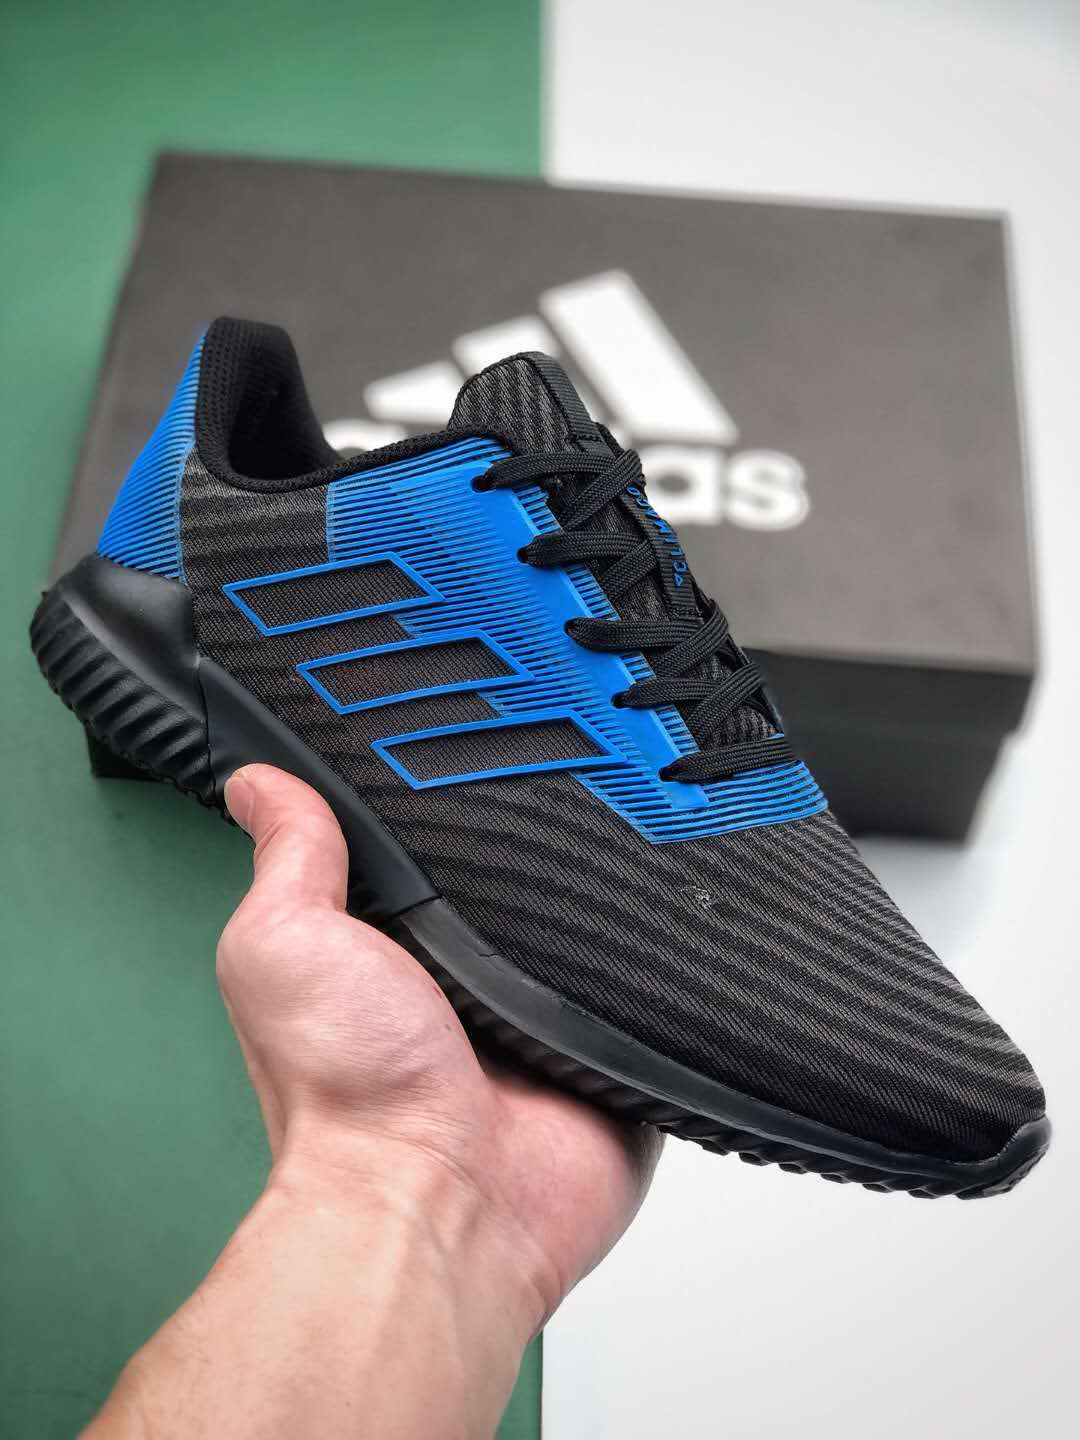 Adidas Climacool 2.0 M 'Blue' G28941 - Lightweight and Breathable Footwear